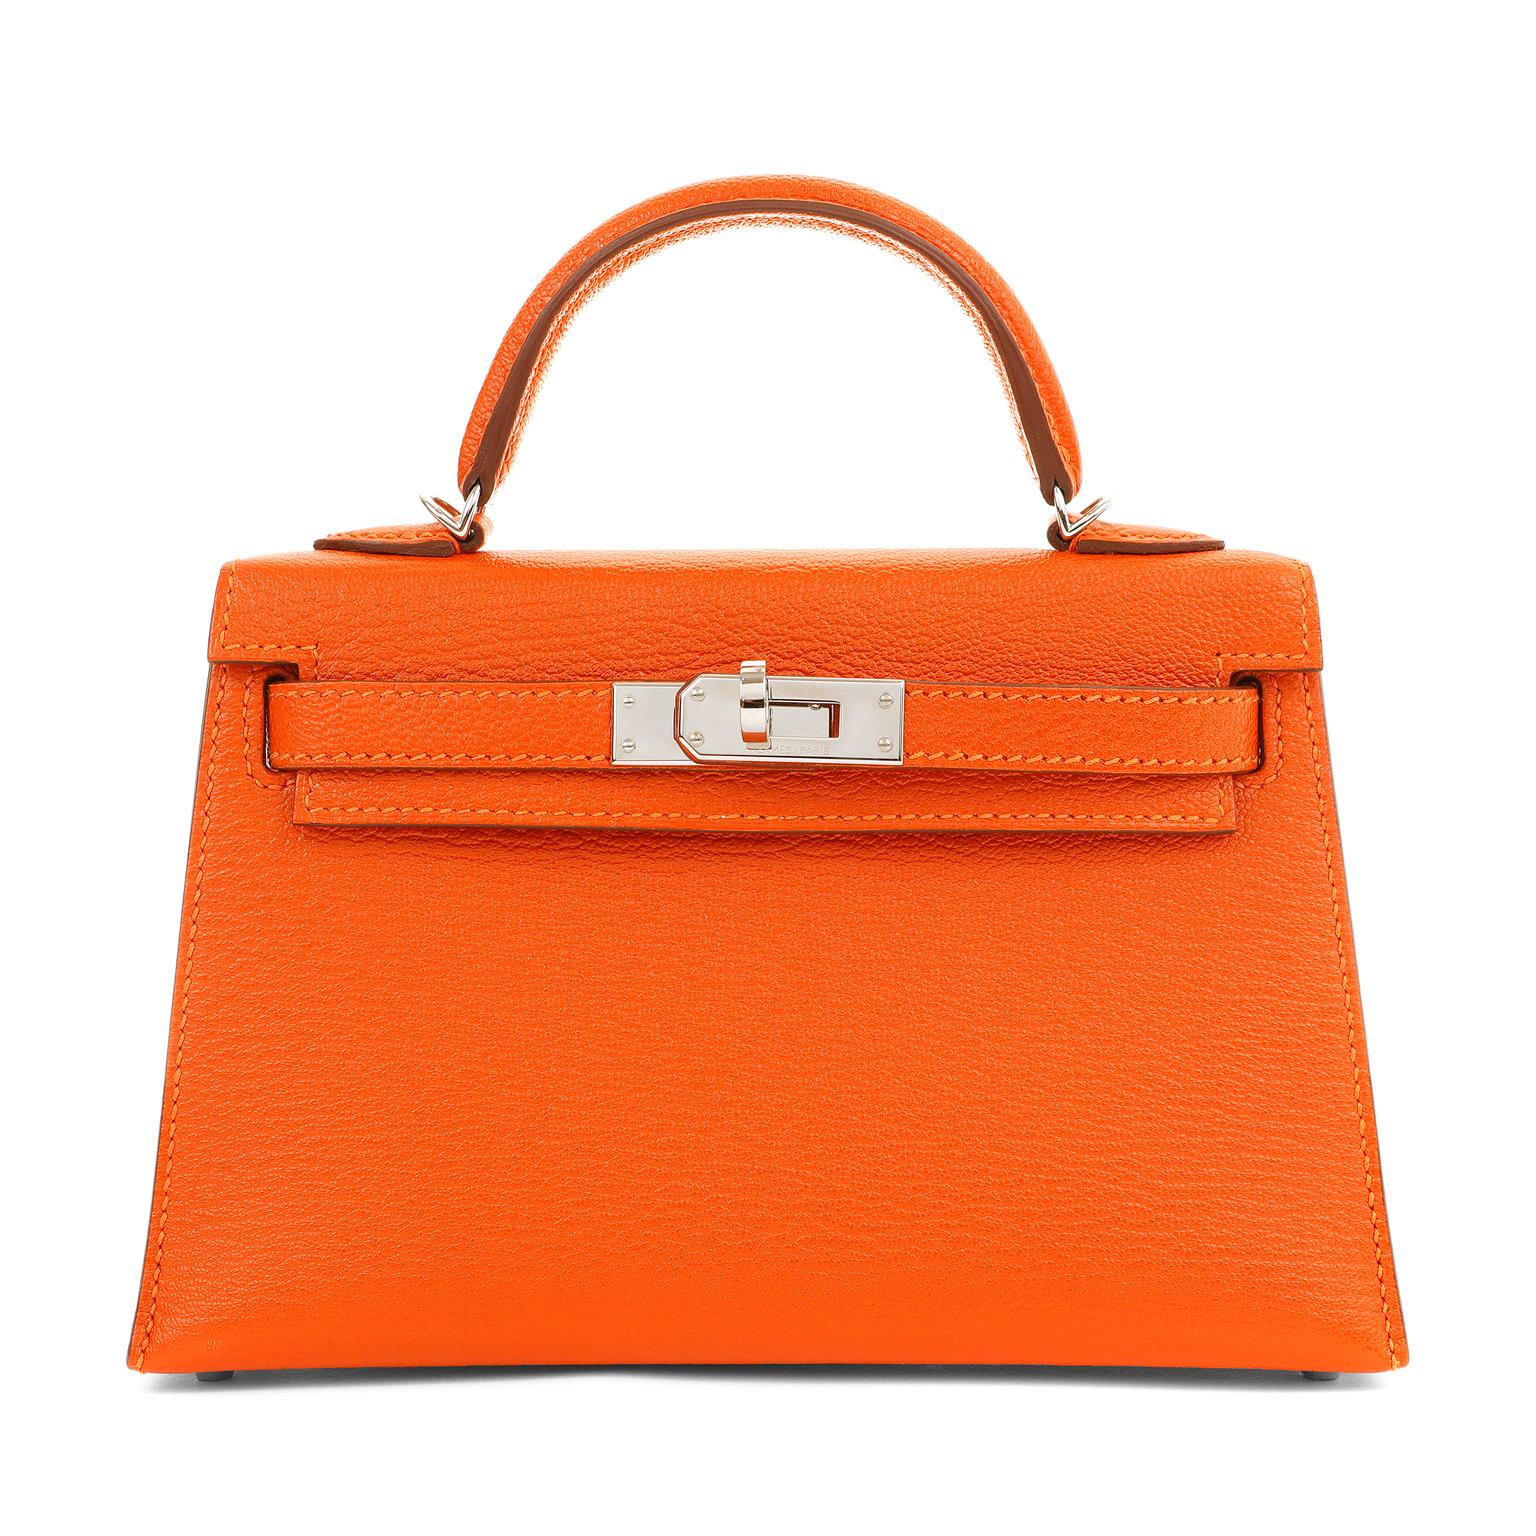 This authentic Hermès 20 cm Orange Chevre Mini Kelly is in pristine condition. Petite and feminine, the crossbody Kelly is very rare in the 20 cm silhouette.
Intense orange chevre leather is extremely durable and desirable.  Sophisticated Palladium